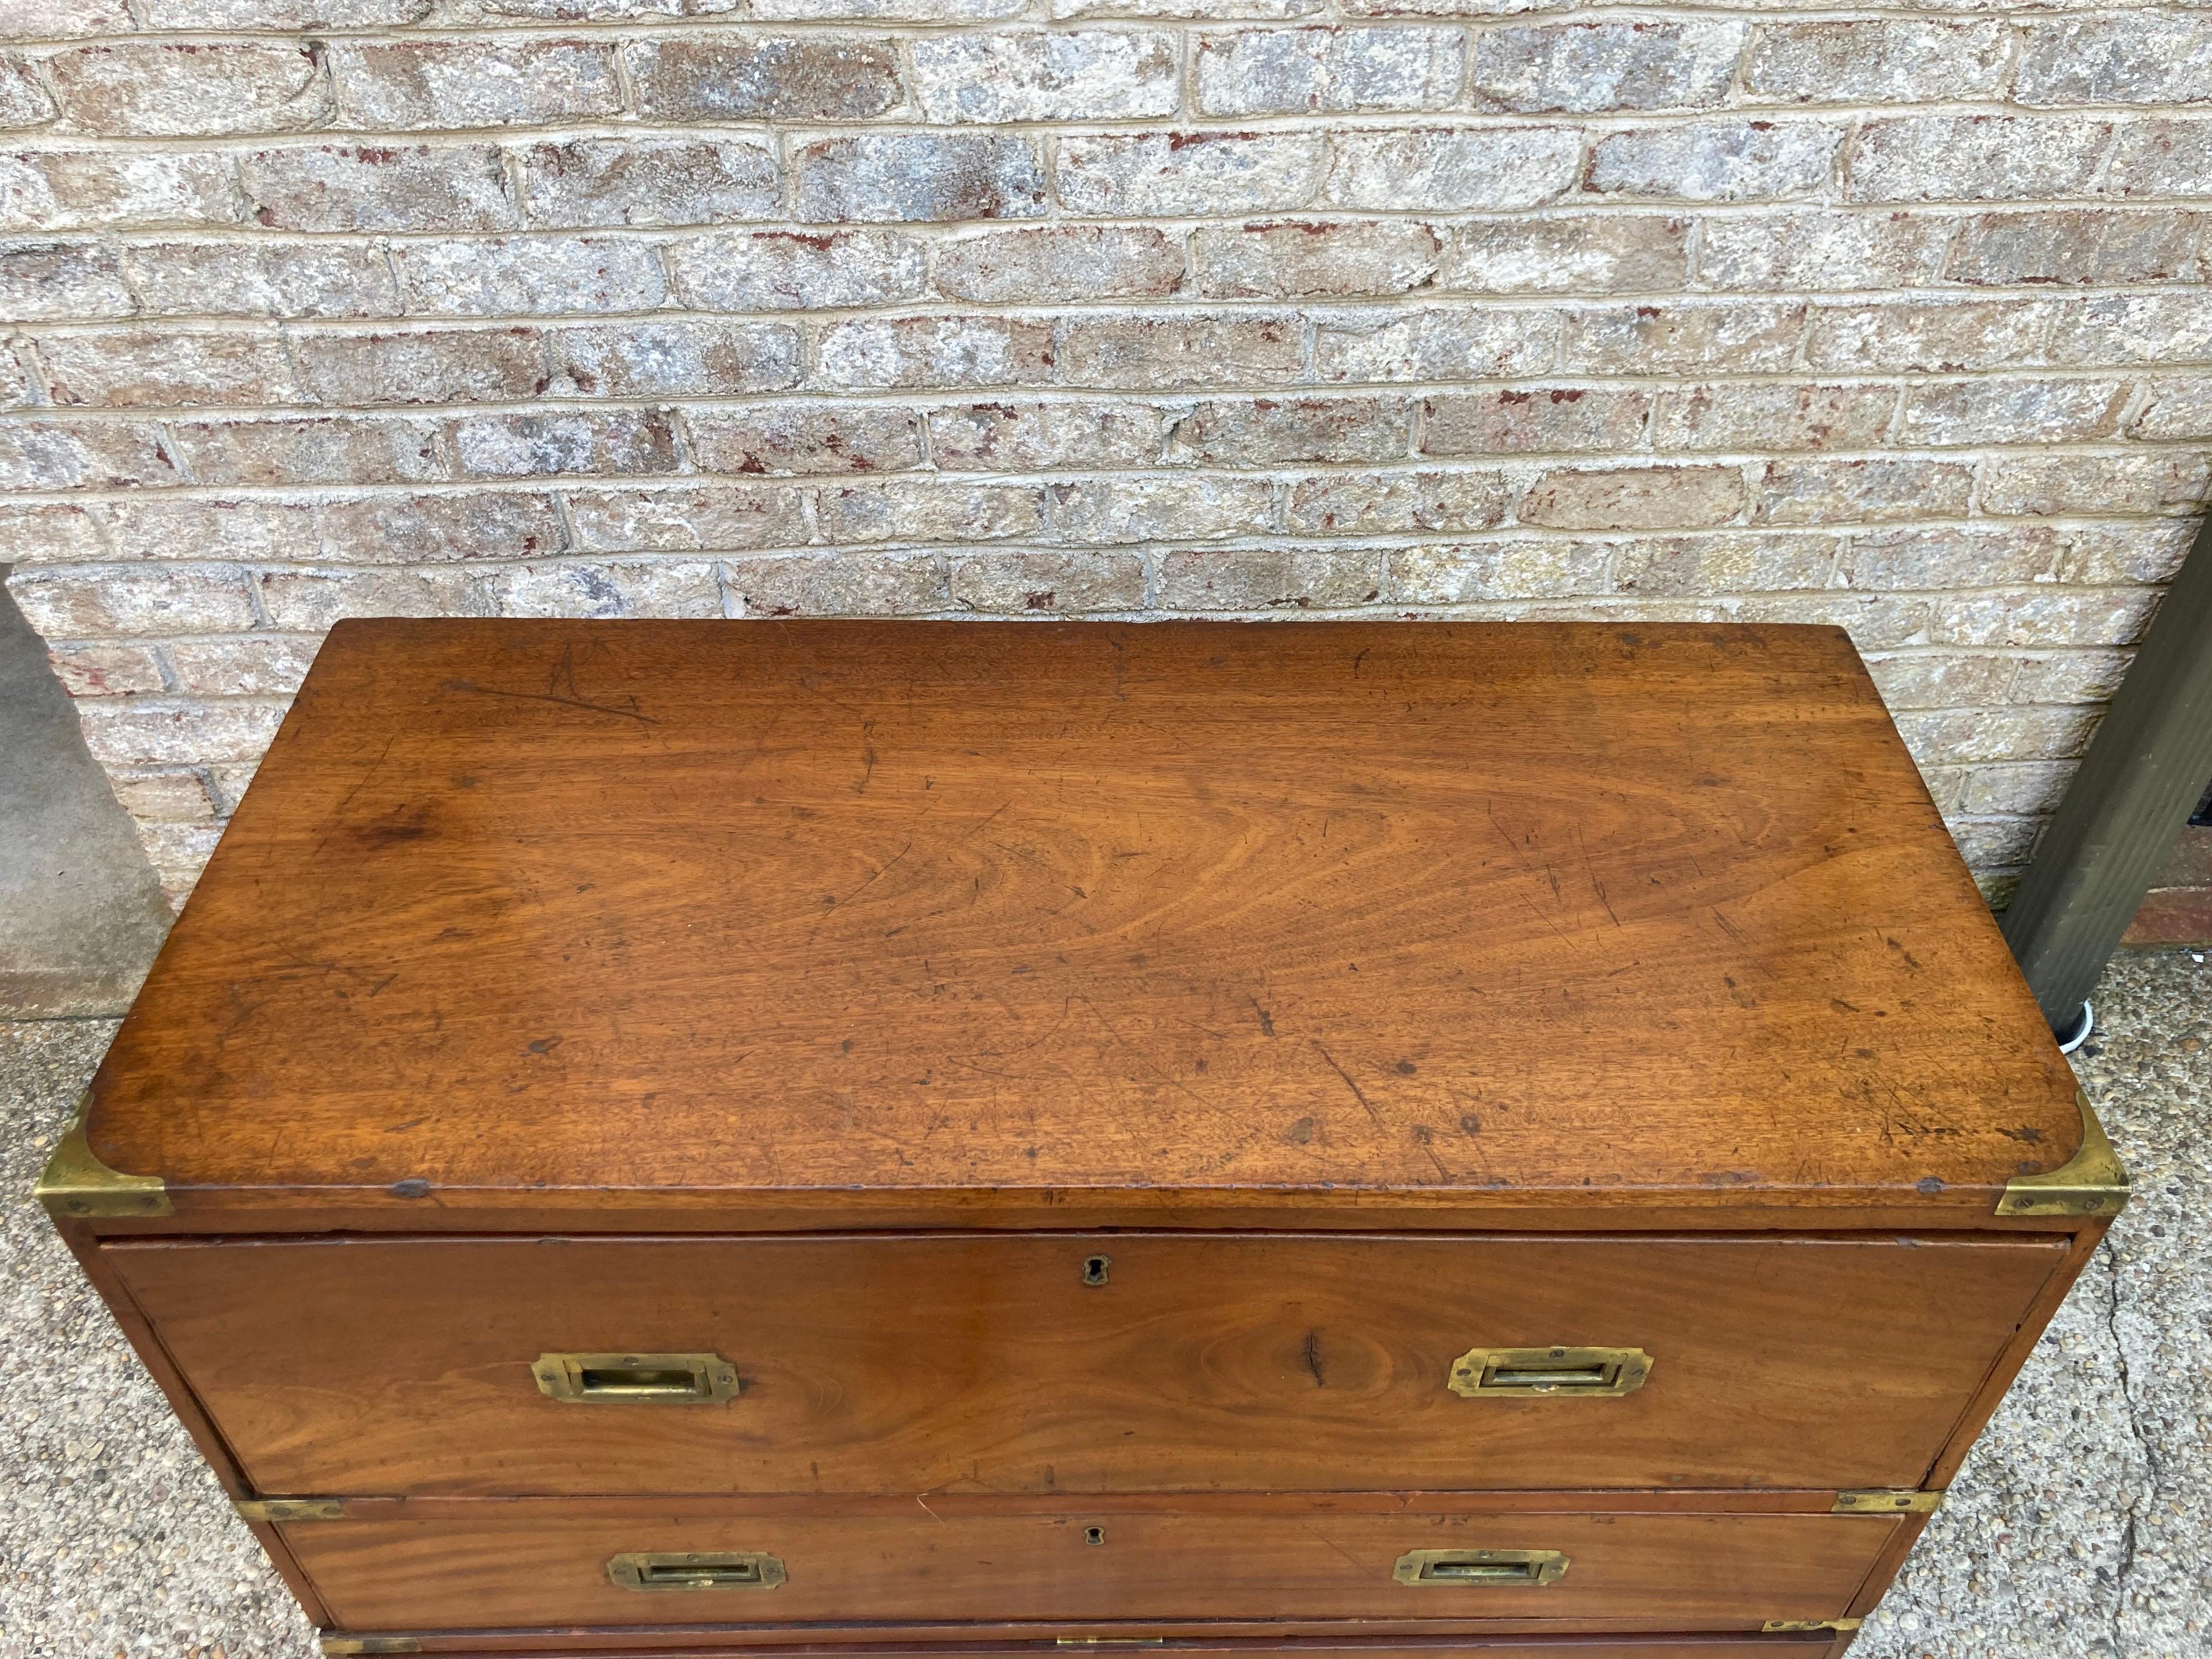 Handsome 19th century two piece campaign chest with a writing desk built into the top drawer....